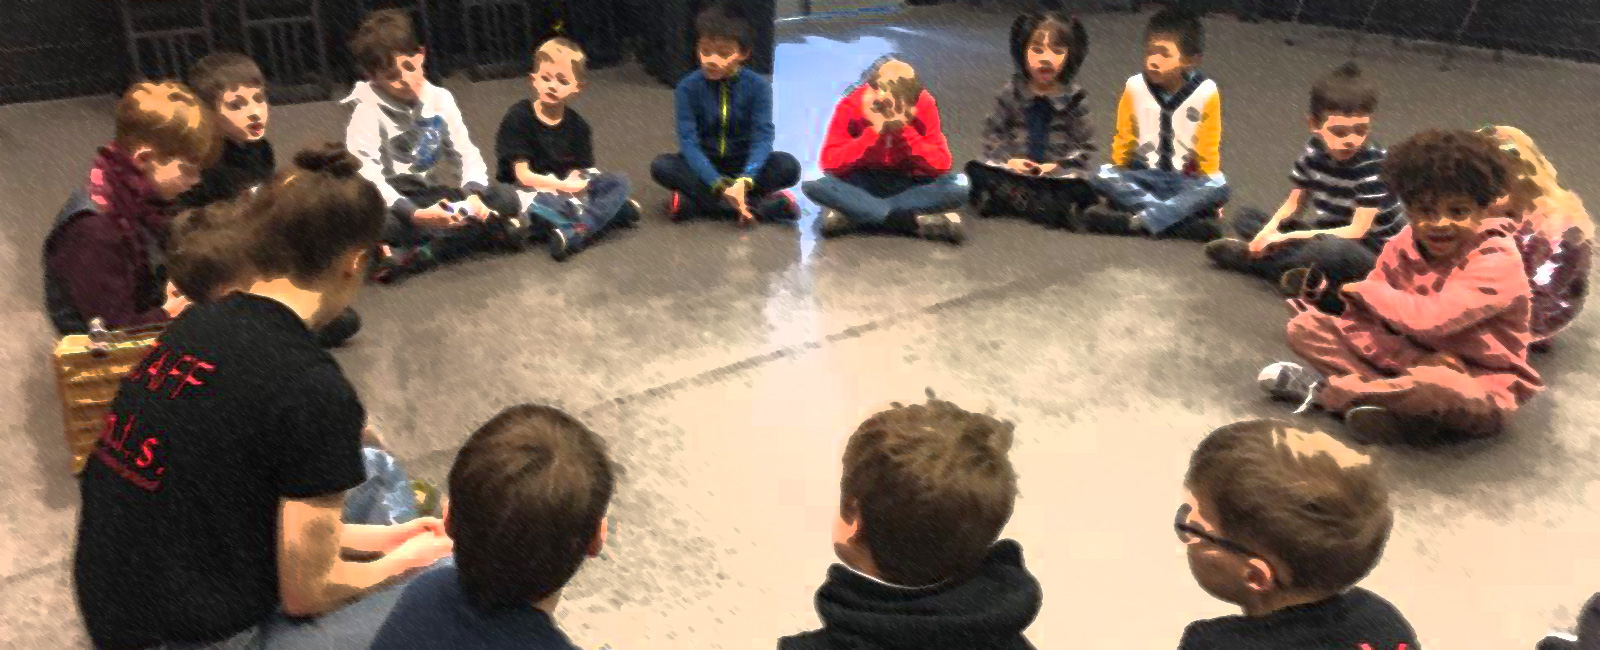 Drama classes for our 'Act One' group are for children aged 5 to 9 years old (Saturdays & Tuesdays)